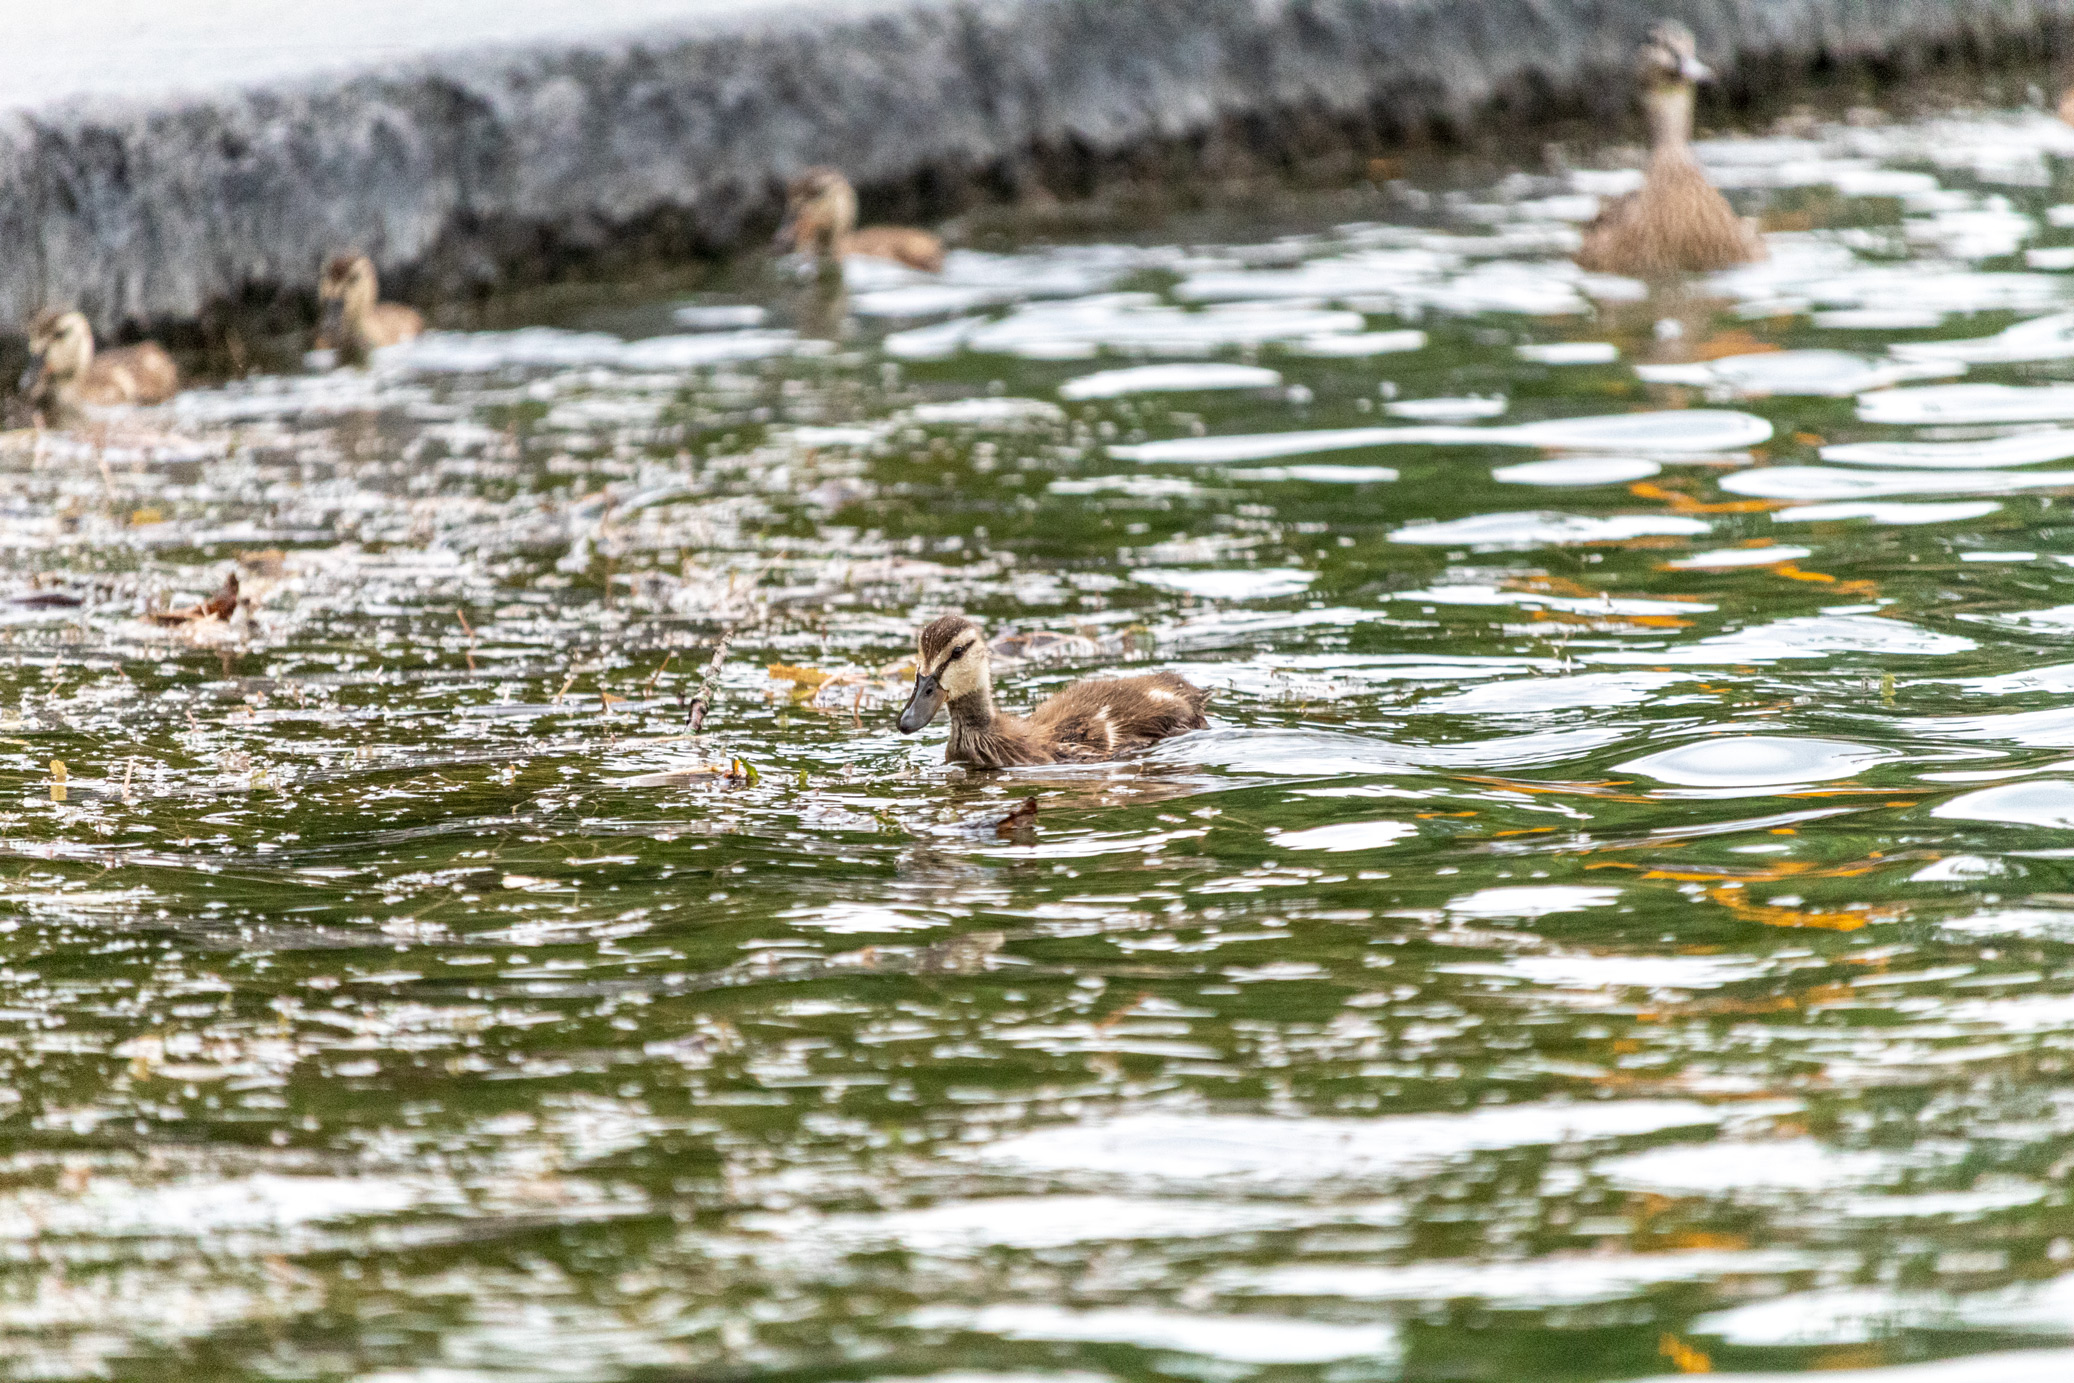 Baby mallard duck swimming; in the background are more ducklings and the ducklings' mother